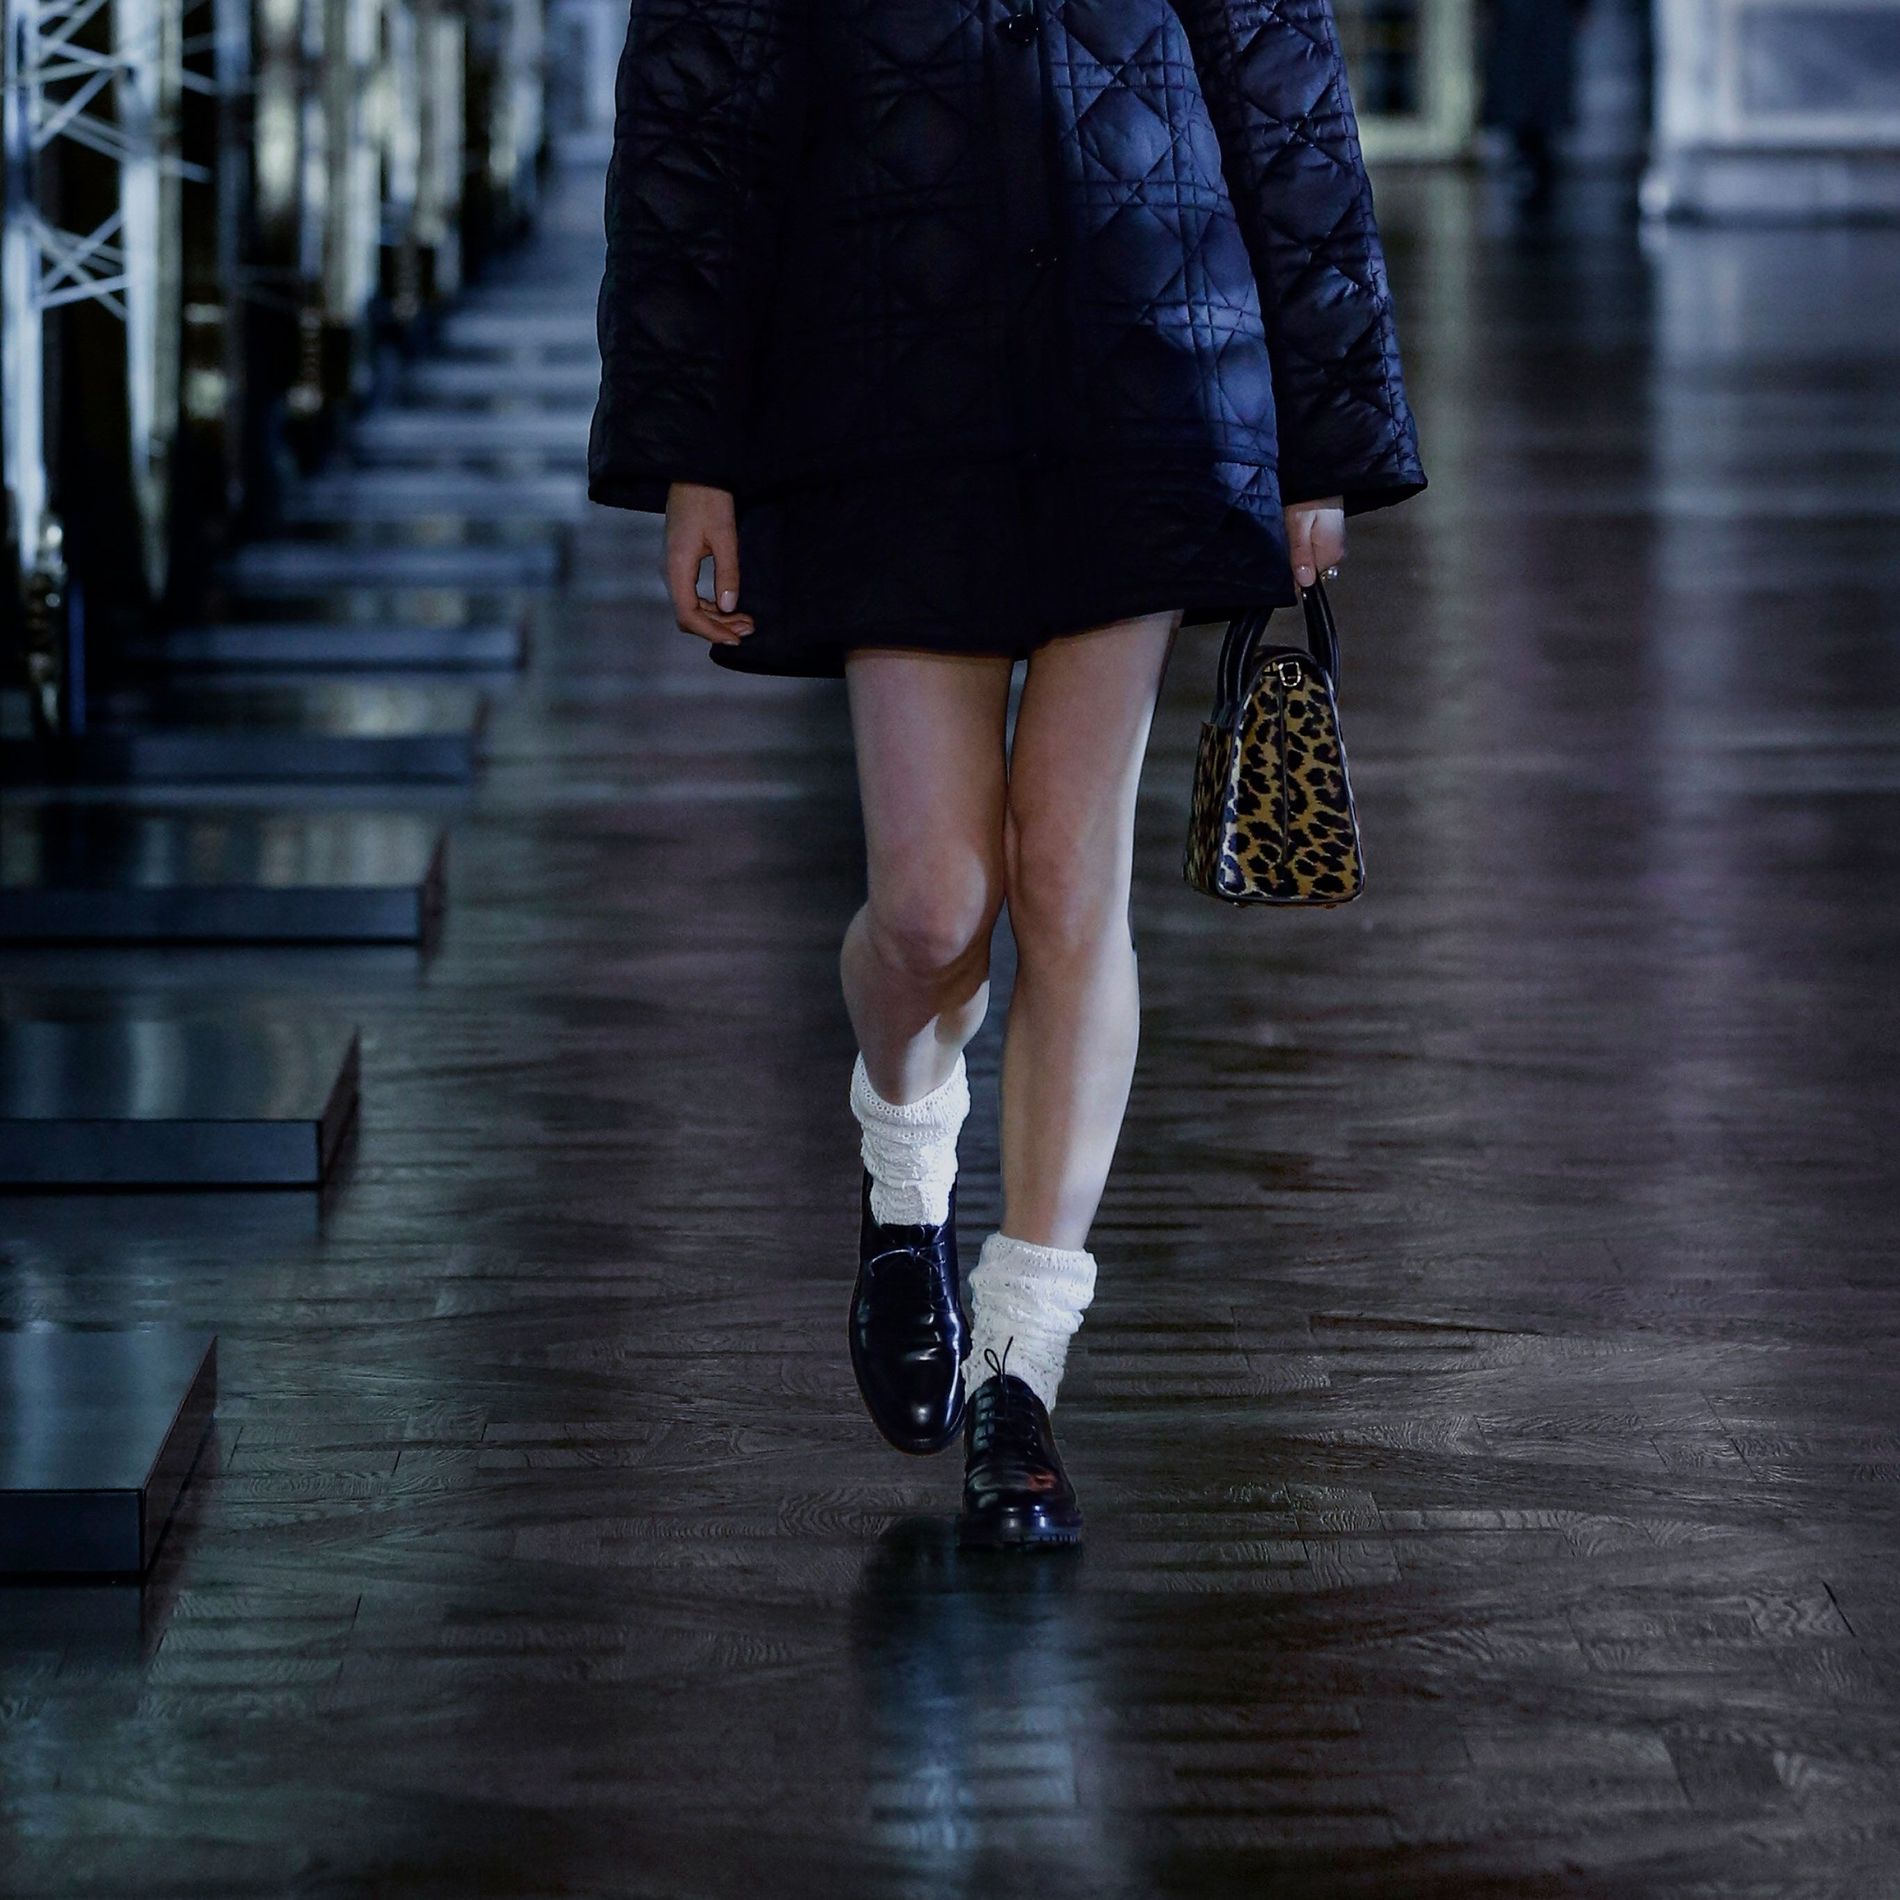 Dior Autumn 2021 with bunched up white socks